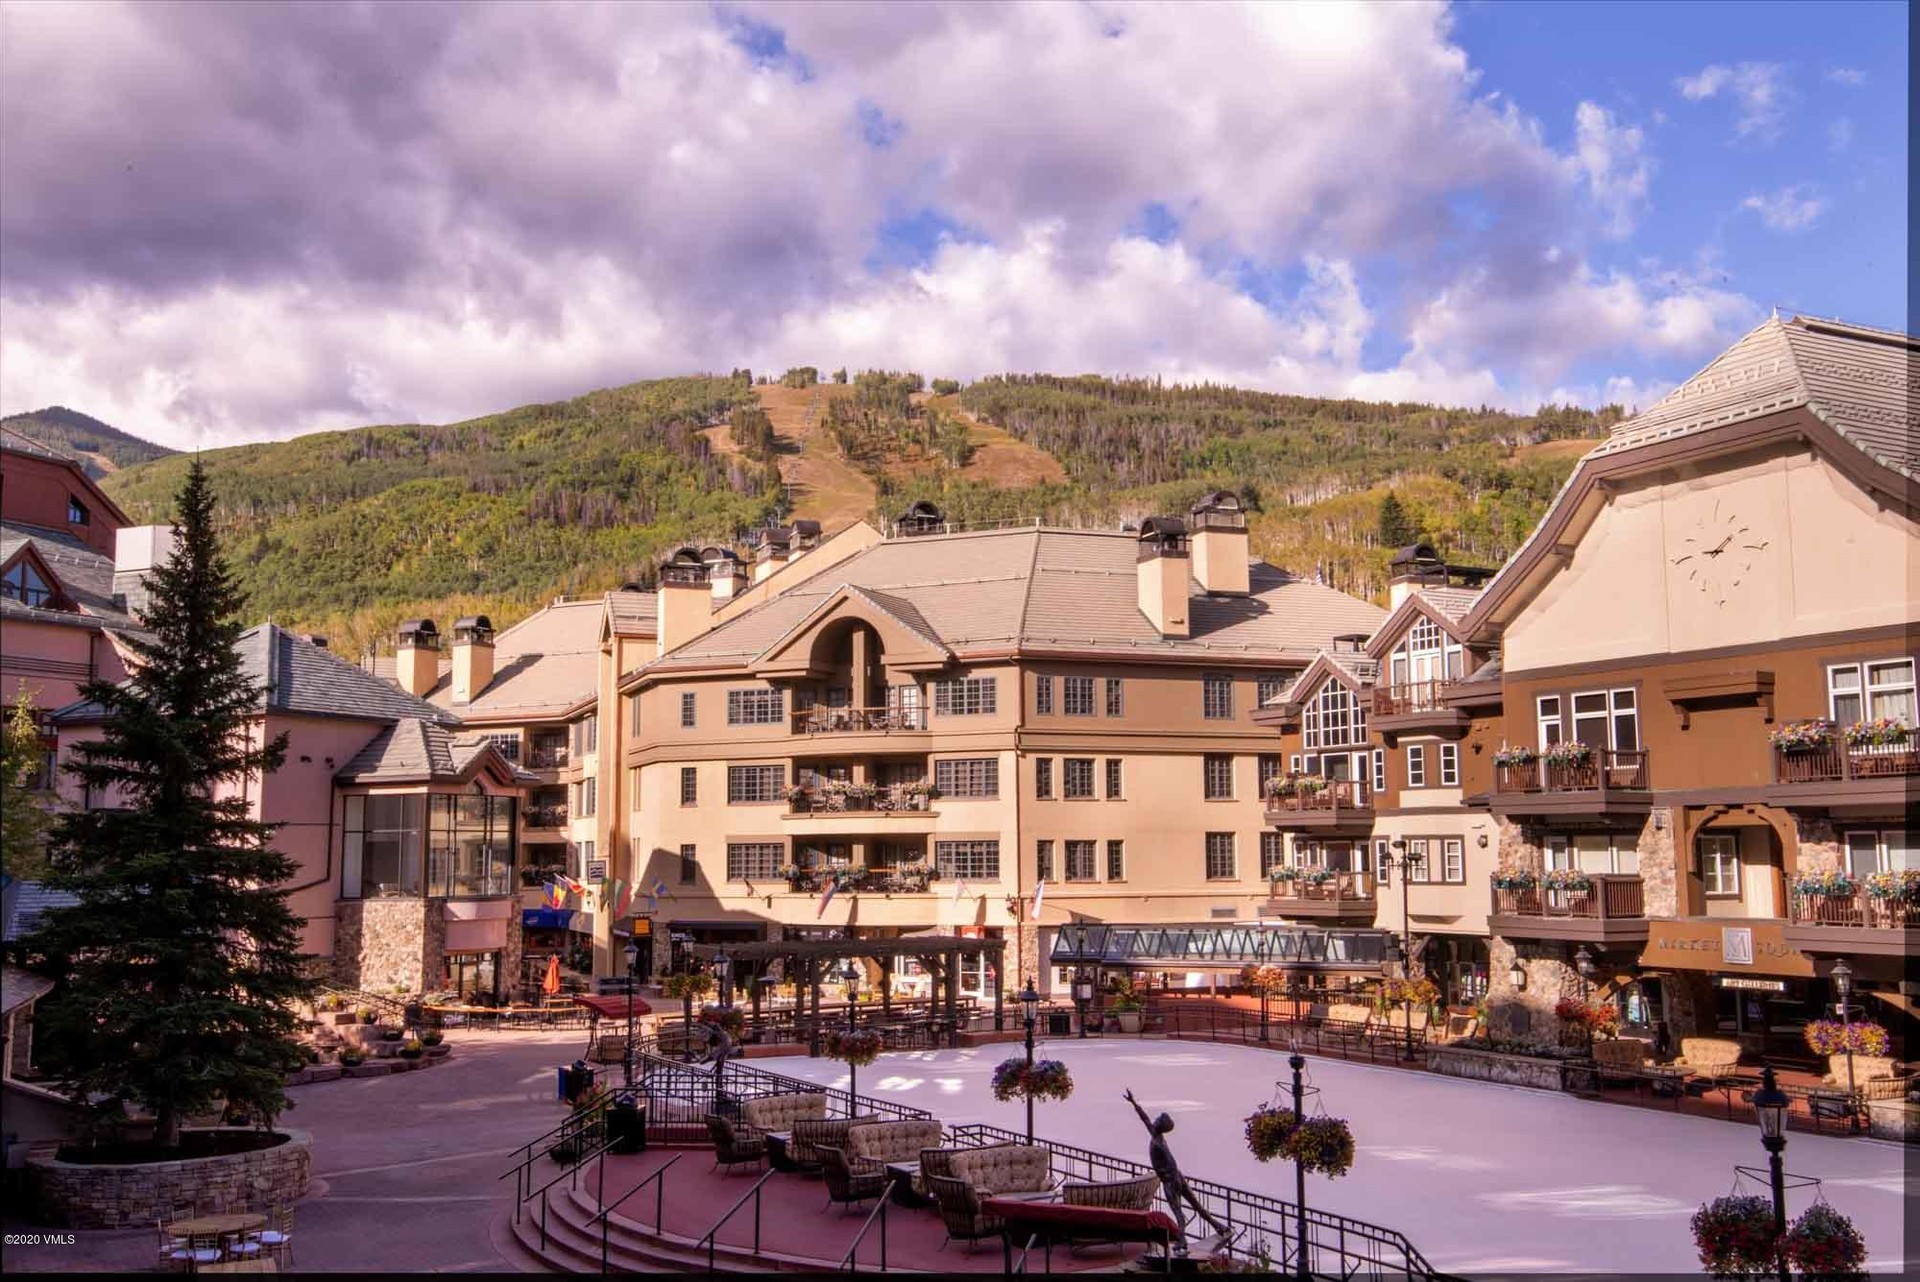 In the Center of Beaver Creek Village